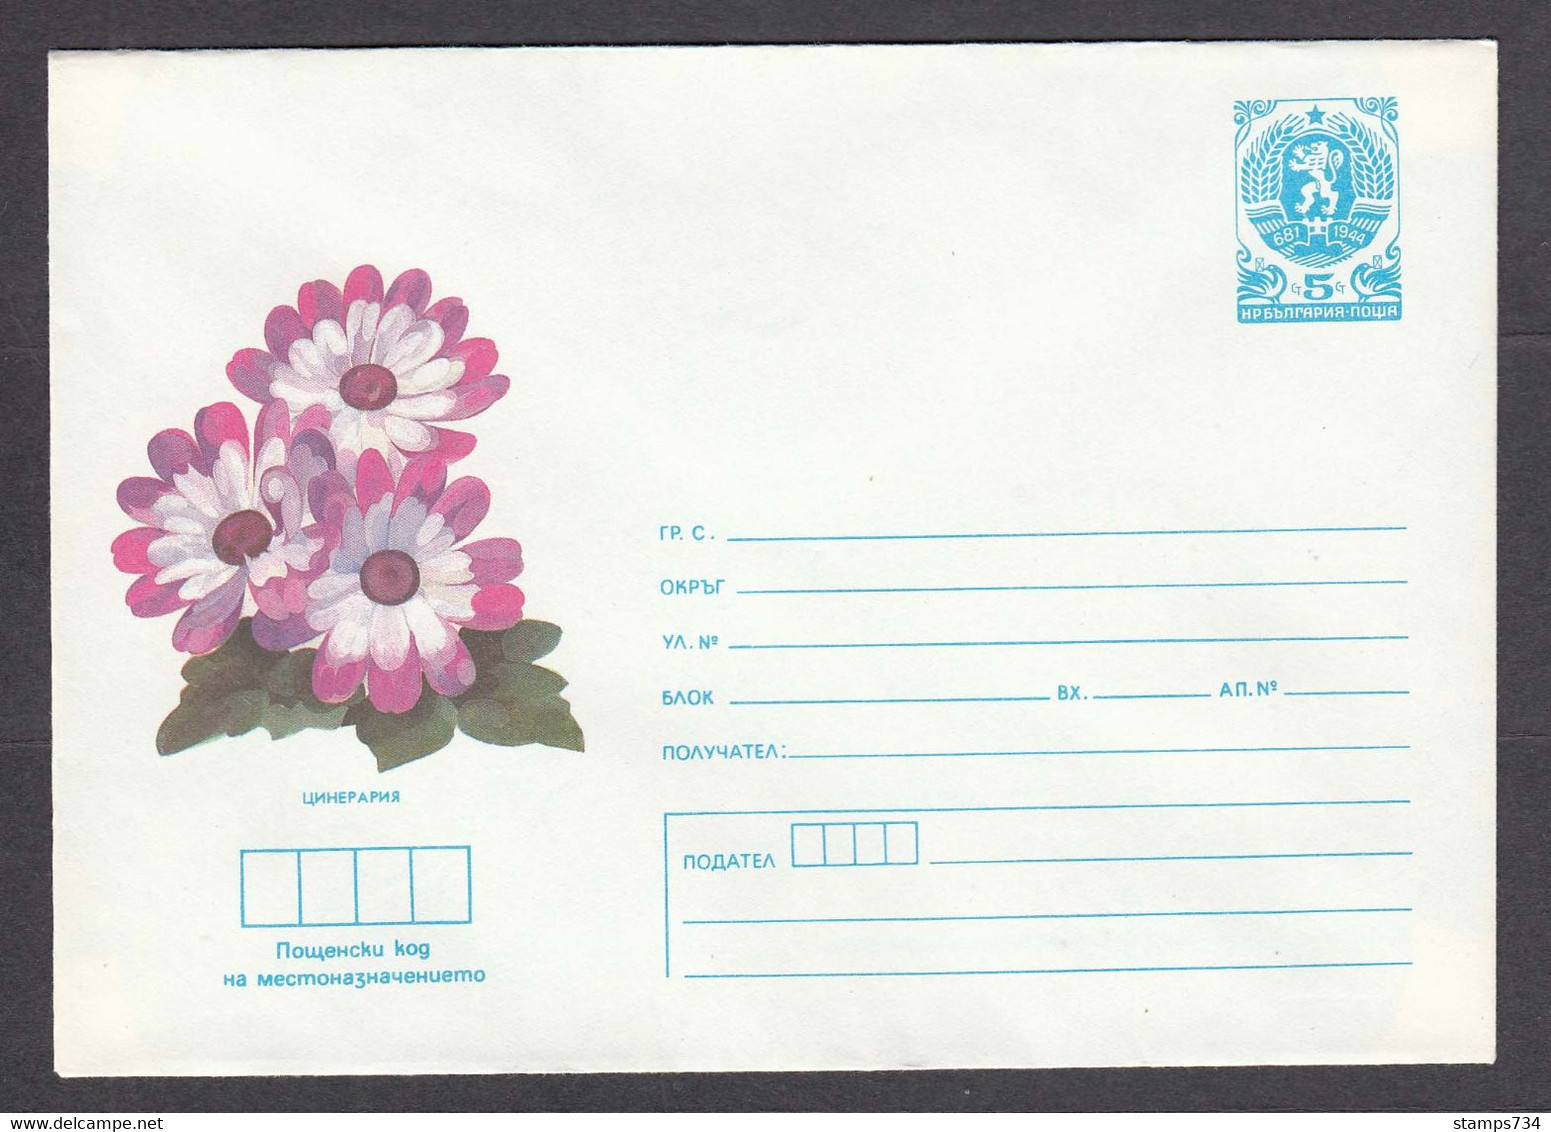 PS 886/1987 - Mint, Flower: Cineraria, Post. Stationery - Bulgaria - Covers